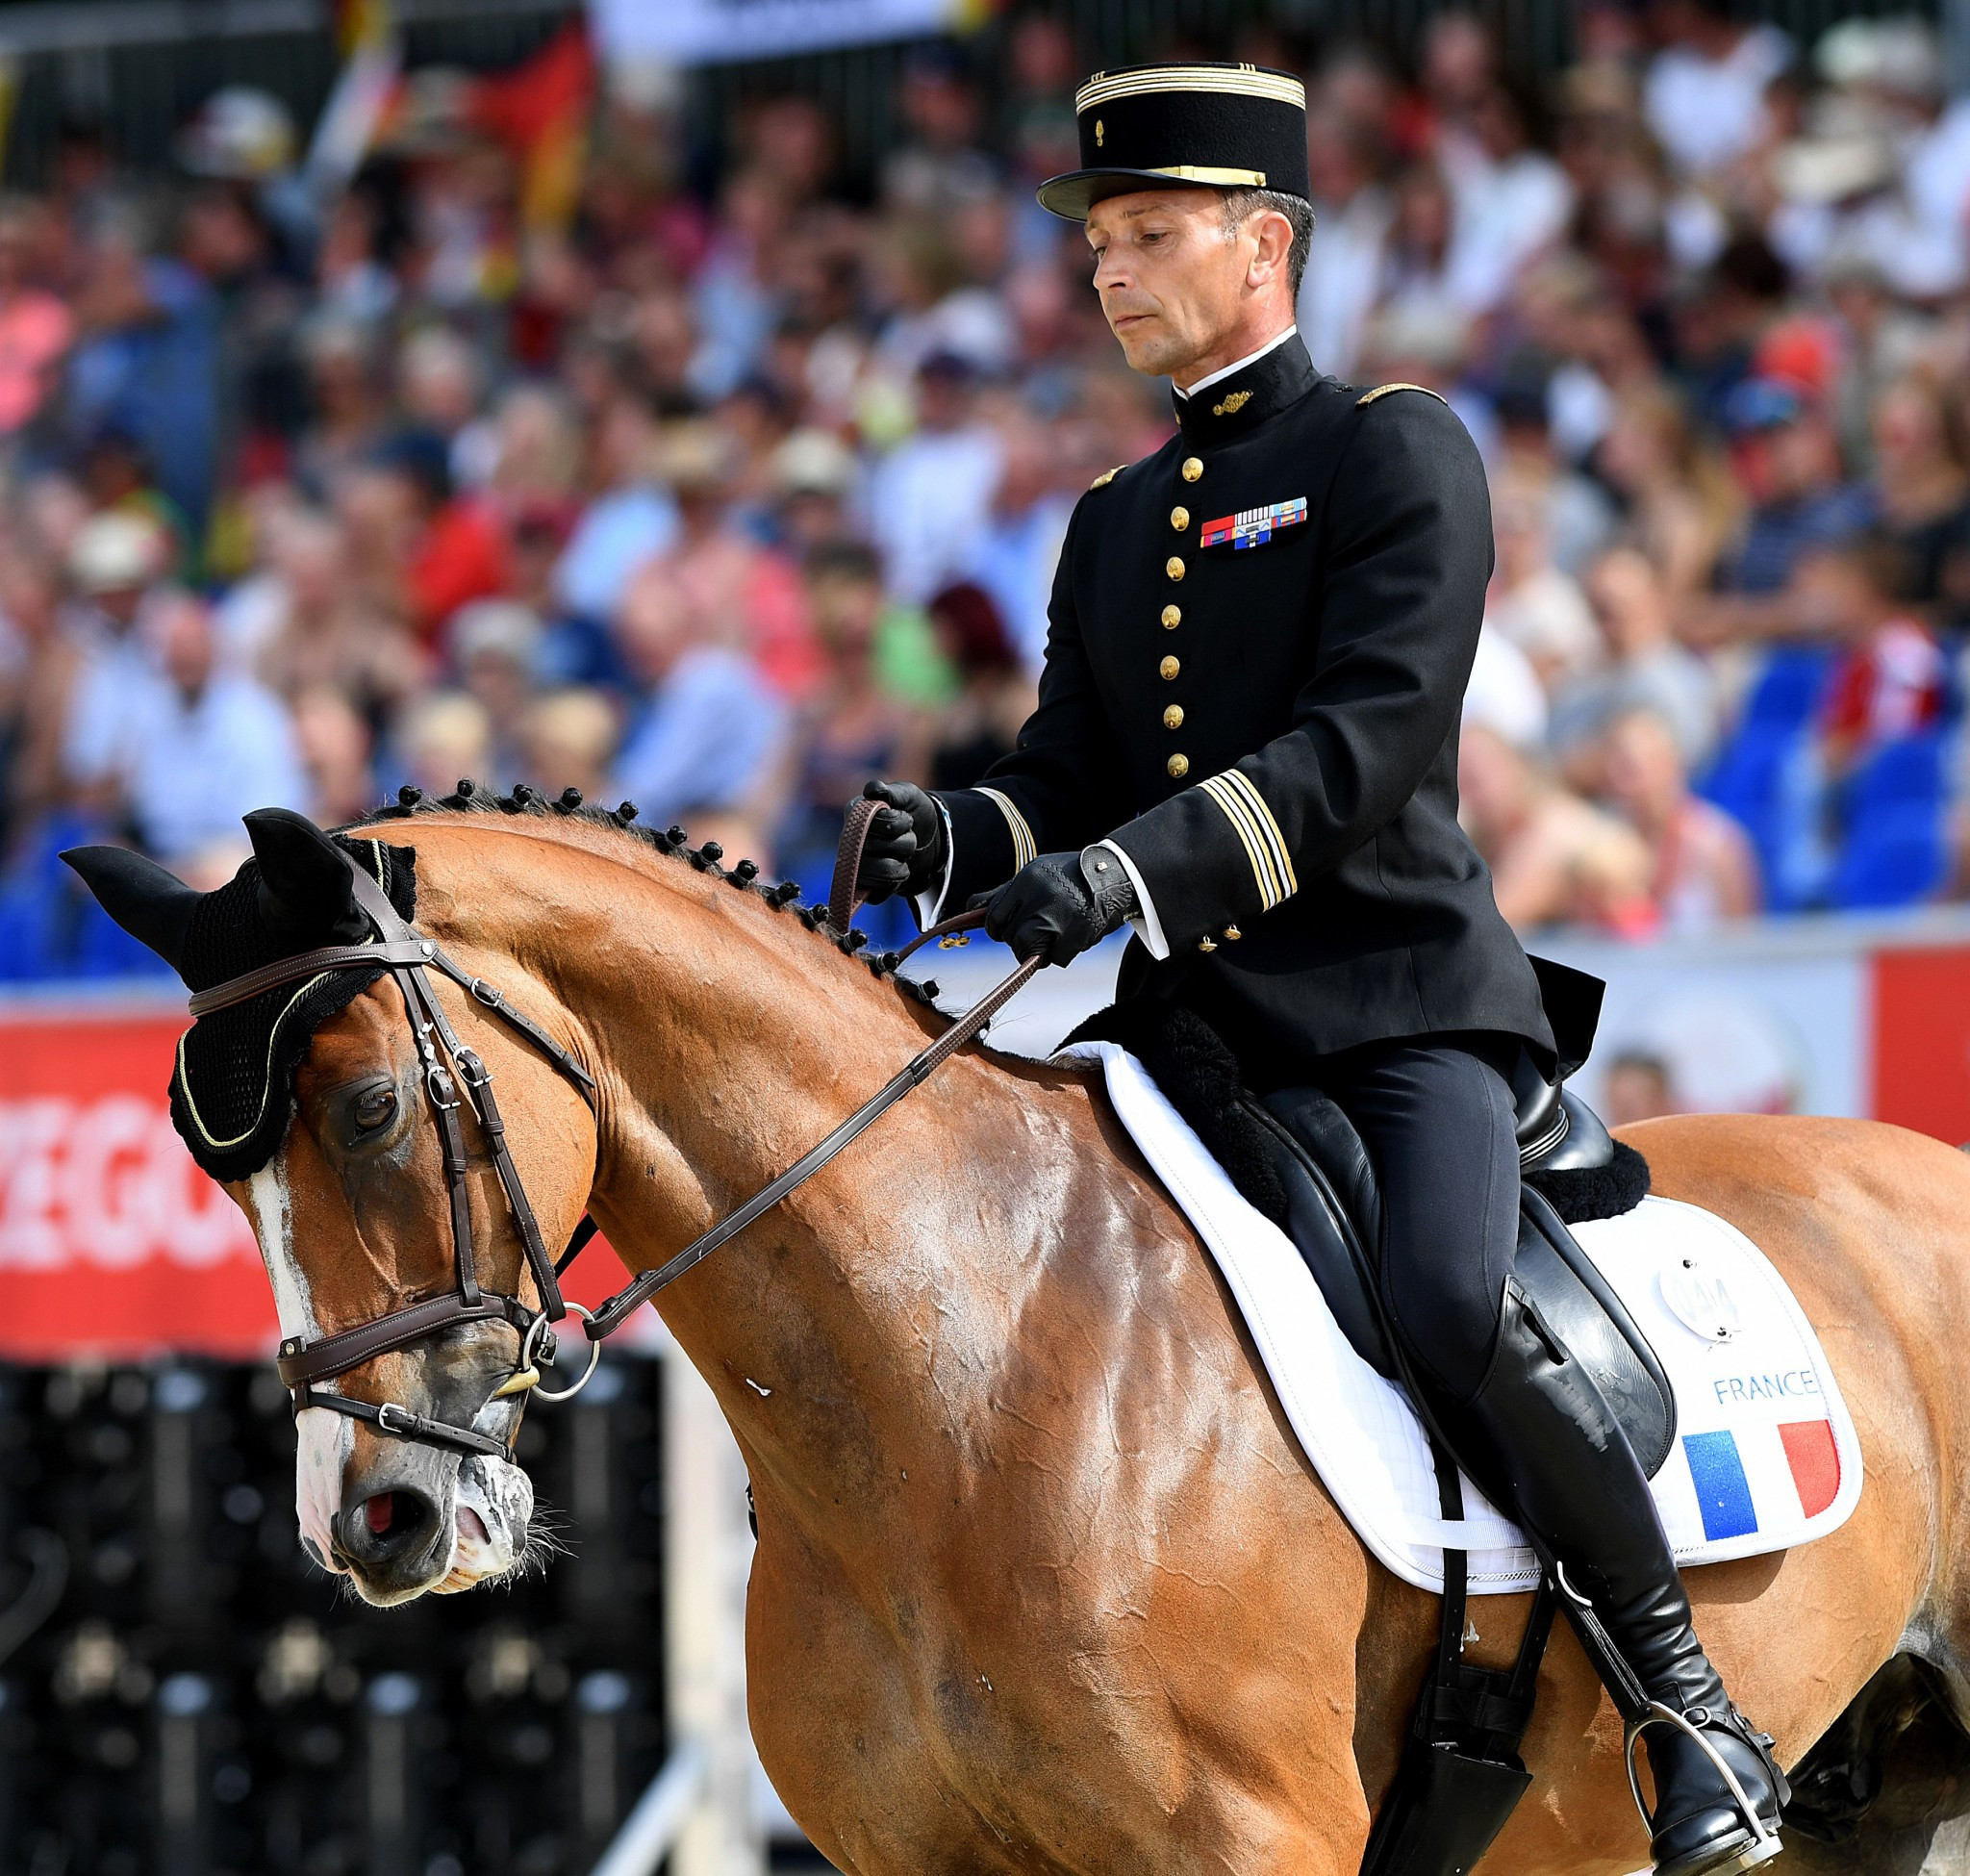 Thibaut Valette, one of the French gold medallists in the team eventing at last year's Rio Games, is eighth in the standings  ©Getty Images